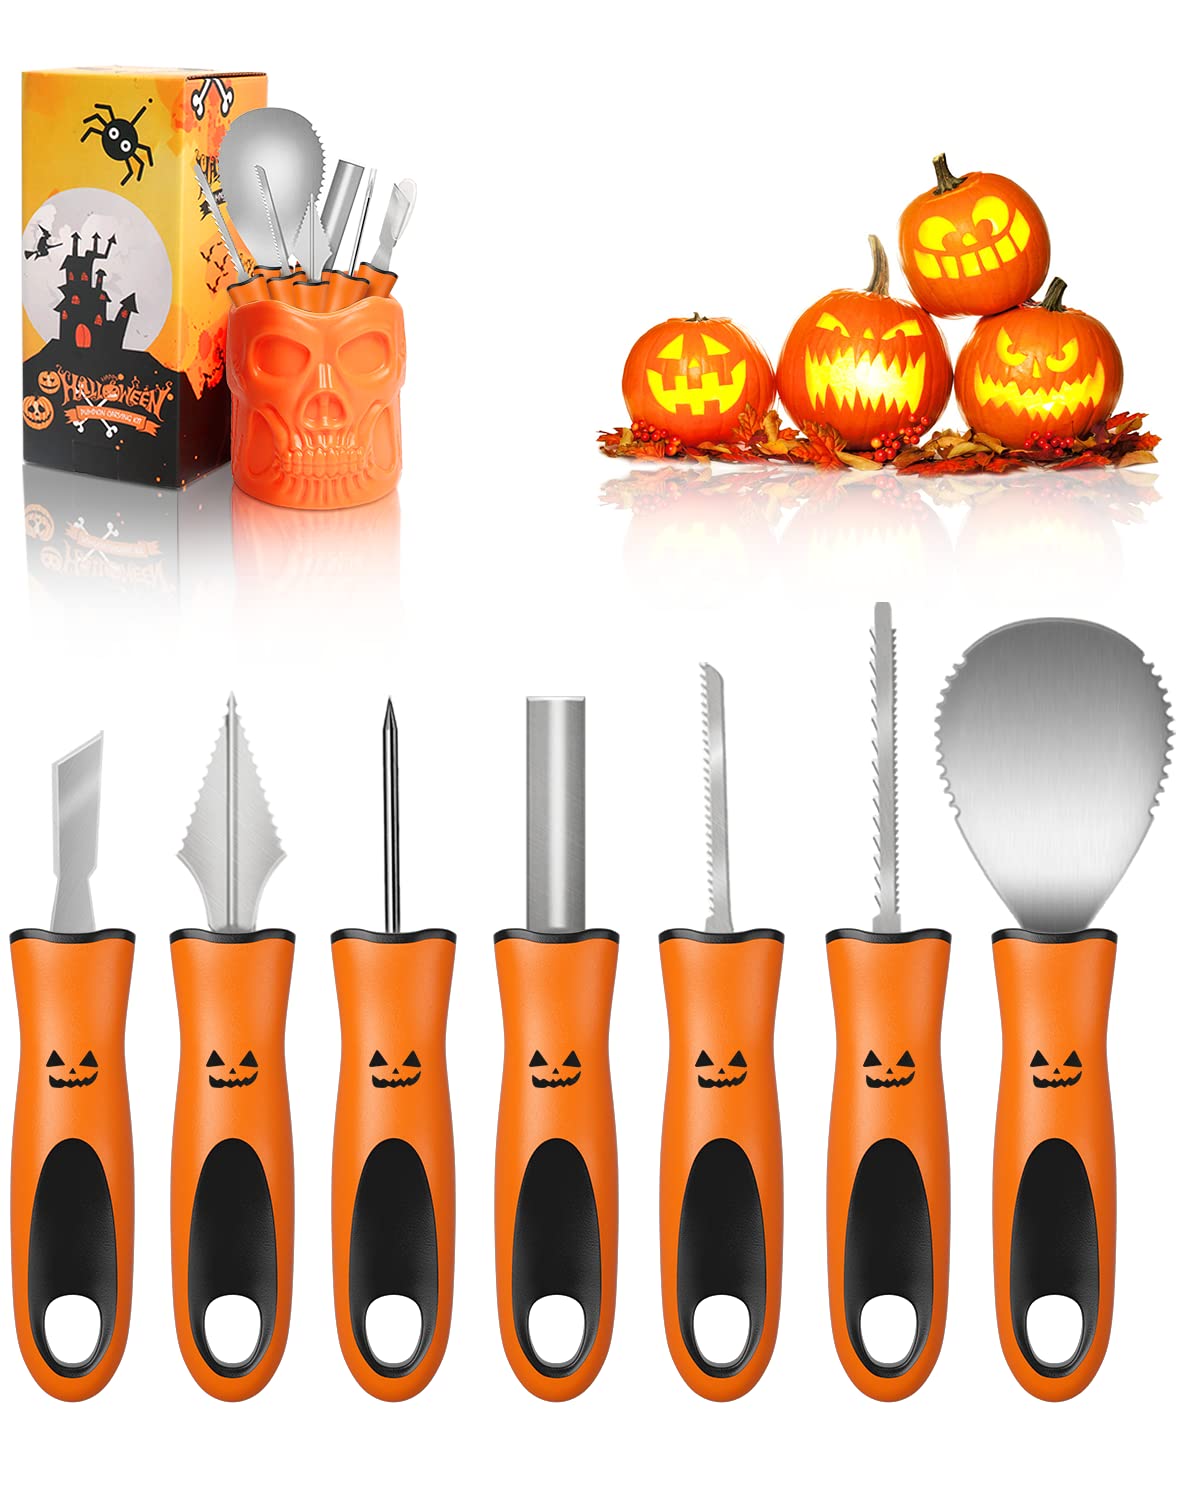 Henscoqi Pumpkin Carving Kit 7 Packs Carving Tools Set, Pumpkin Carving Set Jack Lantern Sculpting Set with Heavy Duty Stainless Steel Durable Handle, Halloween Decoration Set with Storage Skull Cup